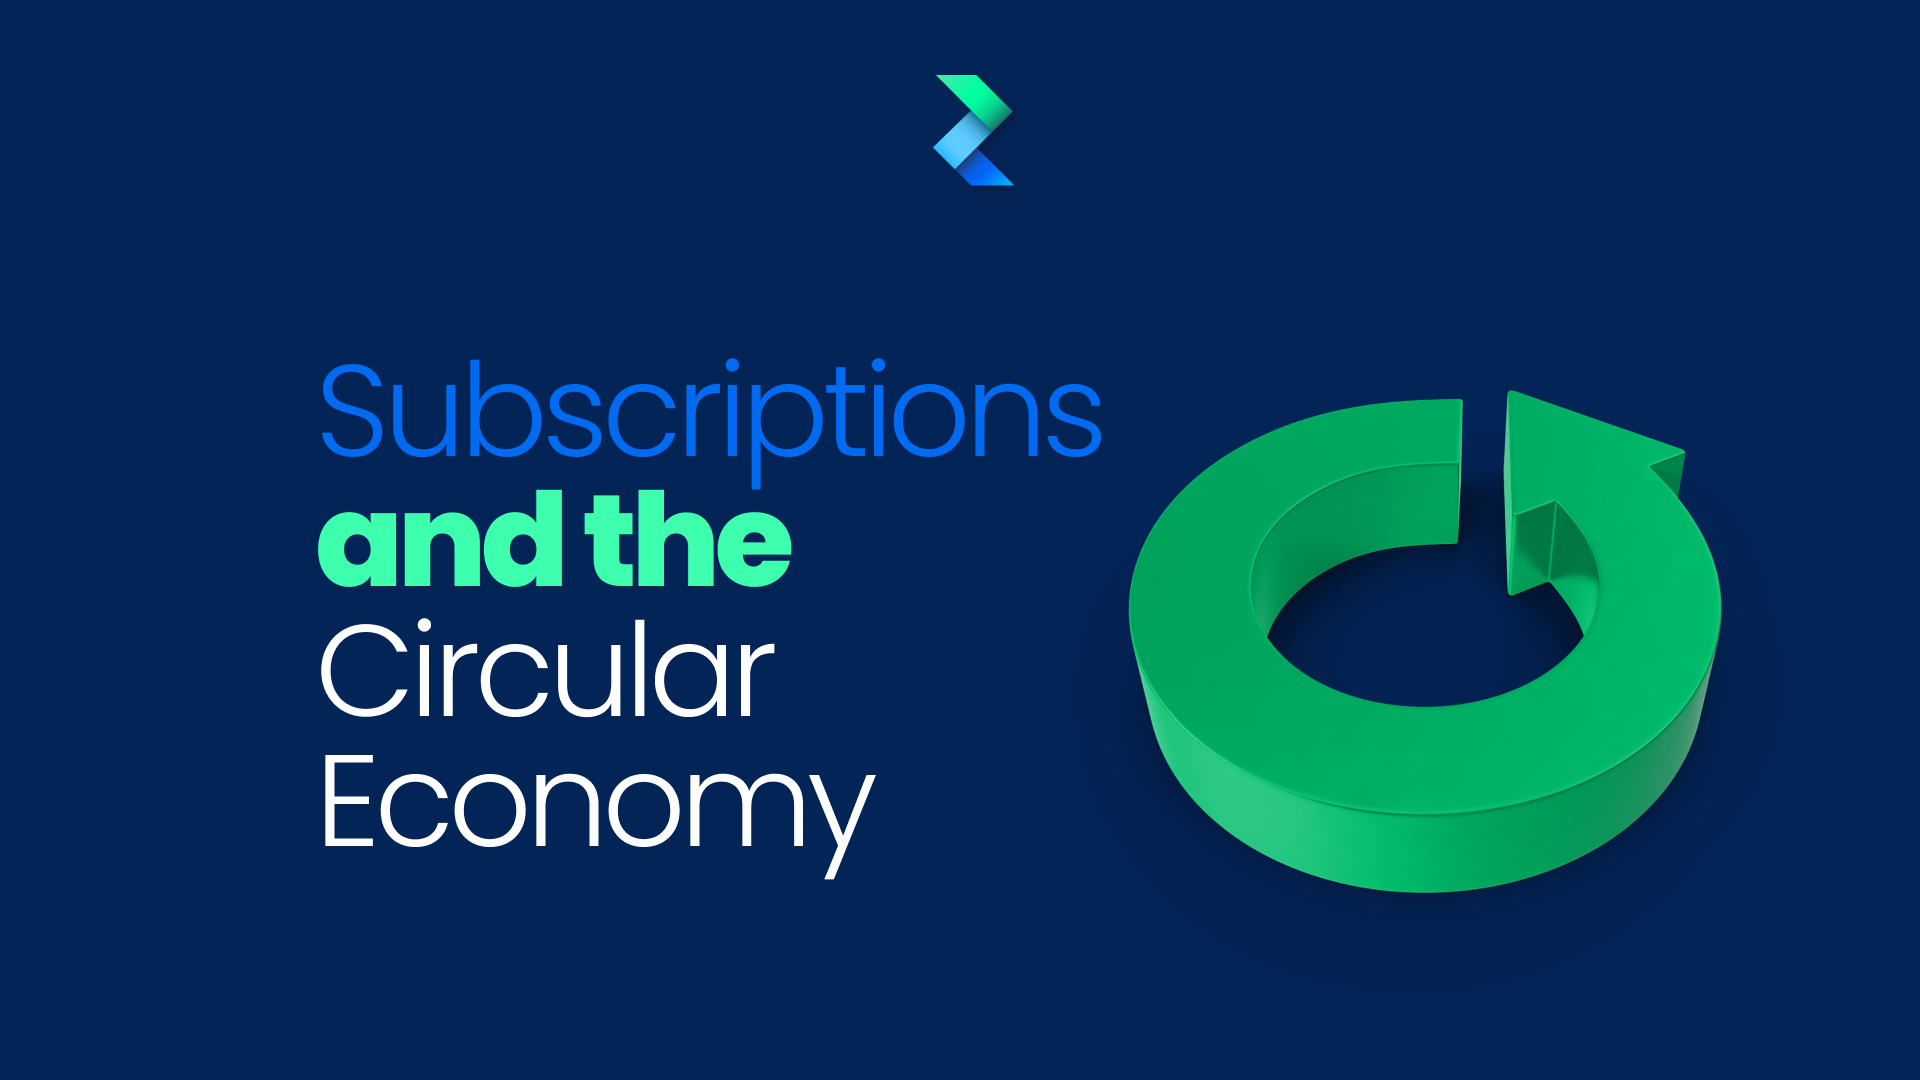 Subscriptions and the Circular Economy